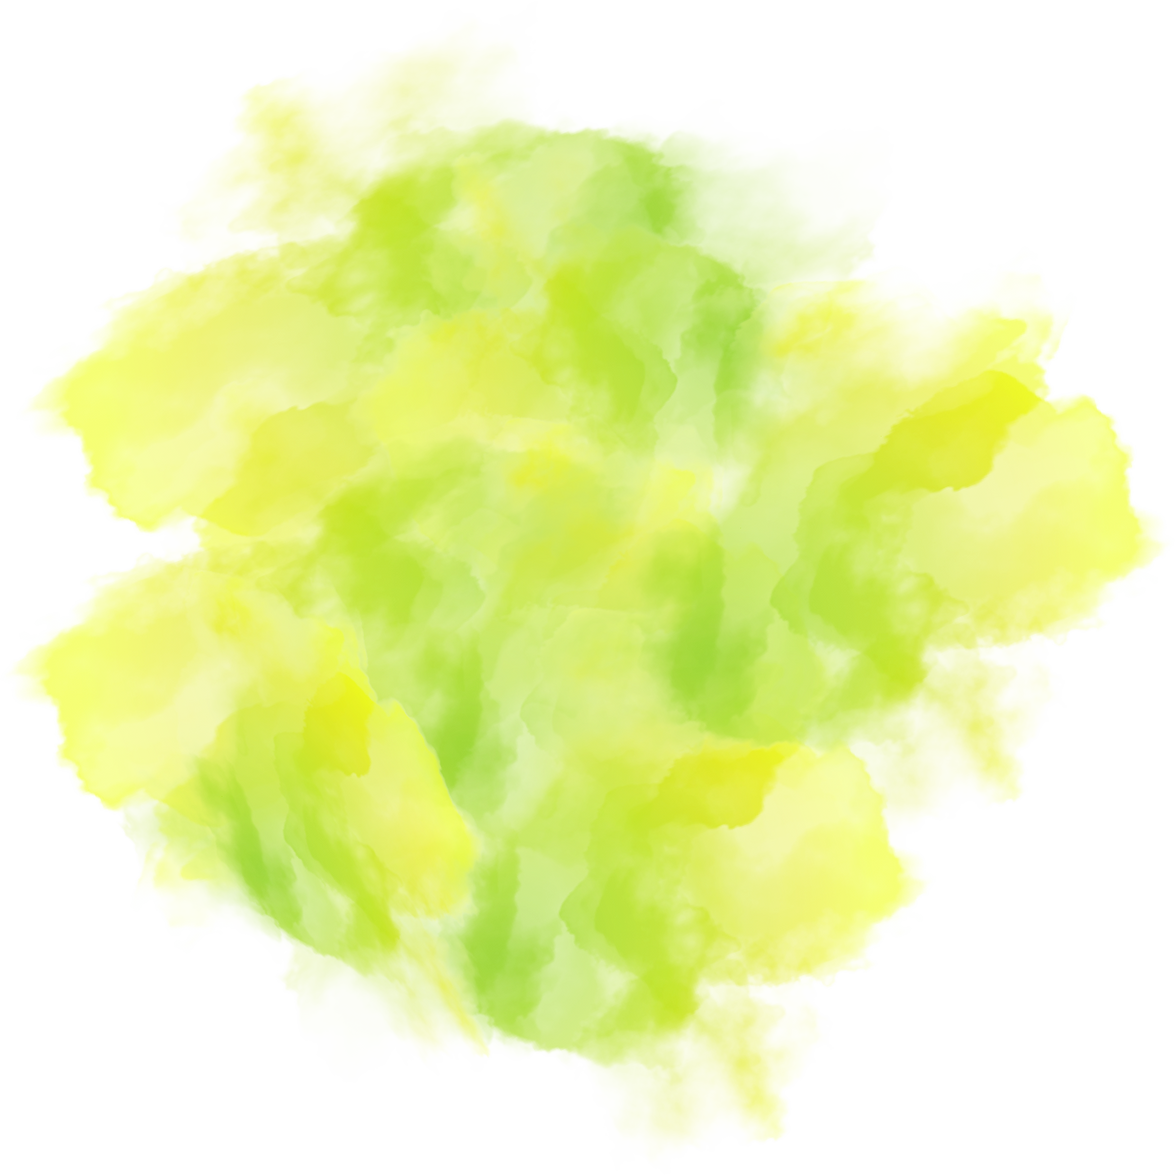 Green and yellow splash watercolor element